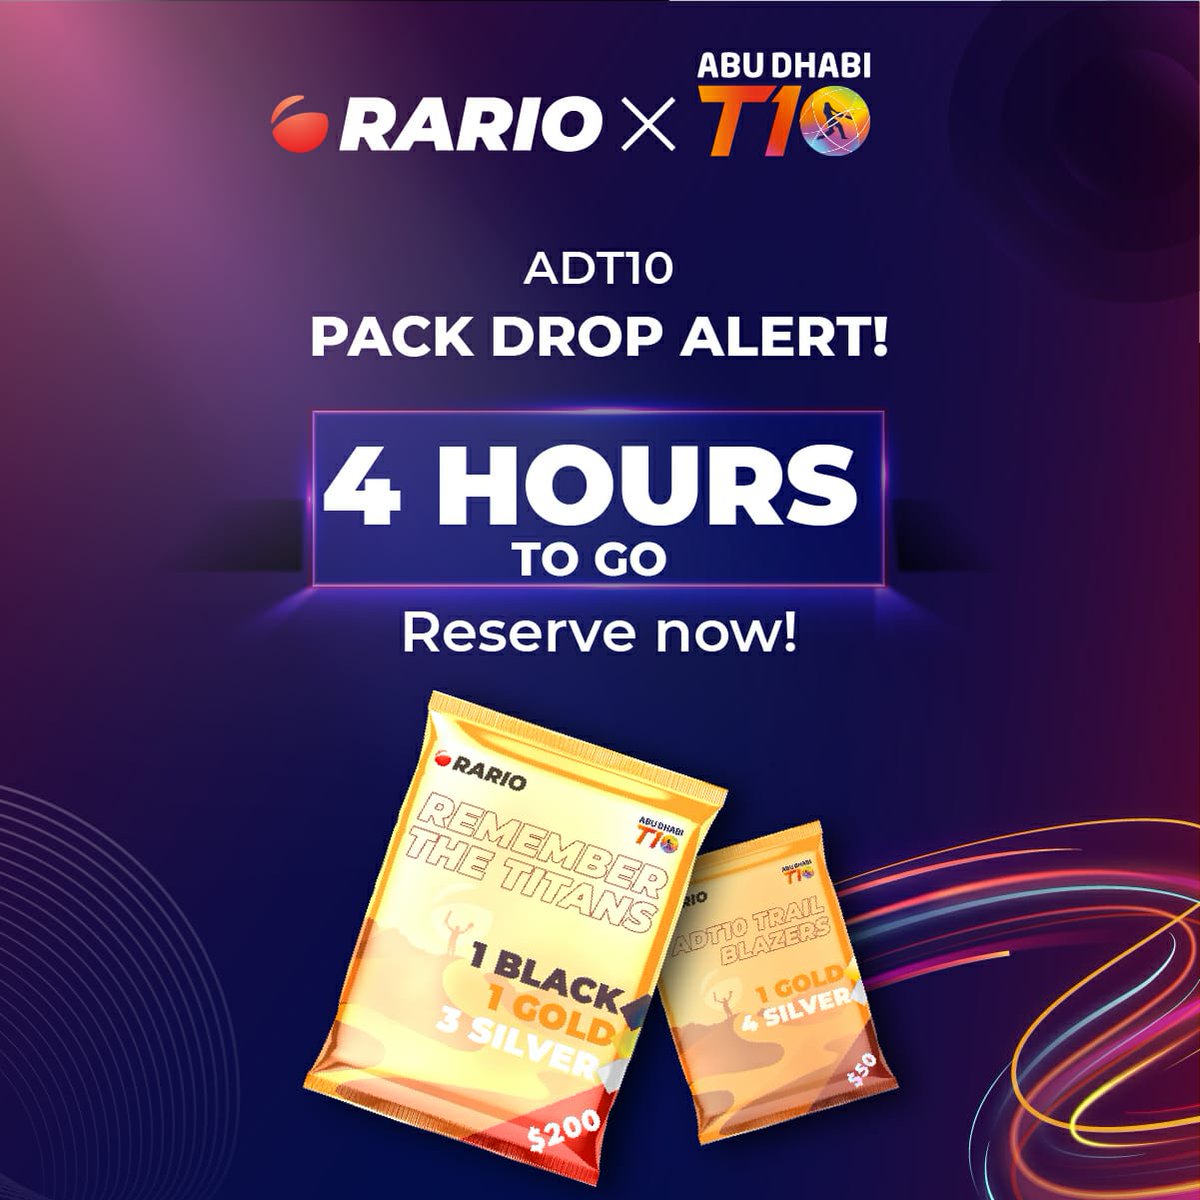 Now this is the time to be in the special moment #RarioPackDrop . The  ADT10 launches today